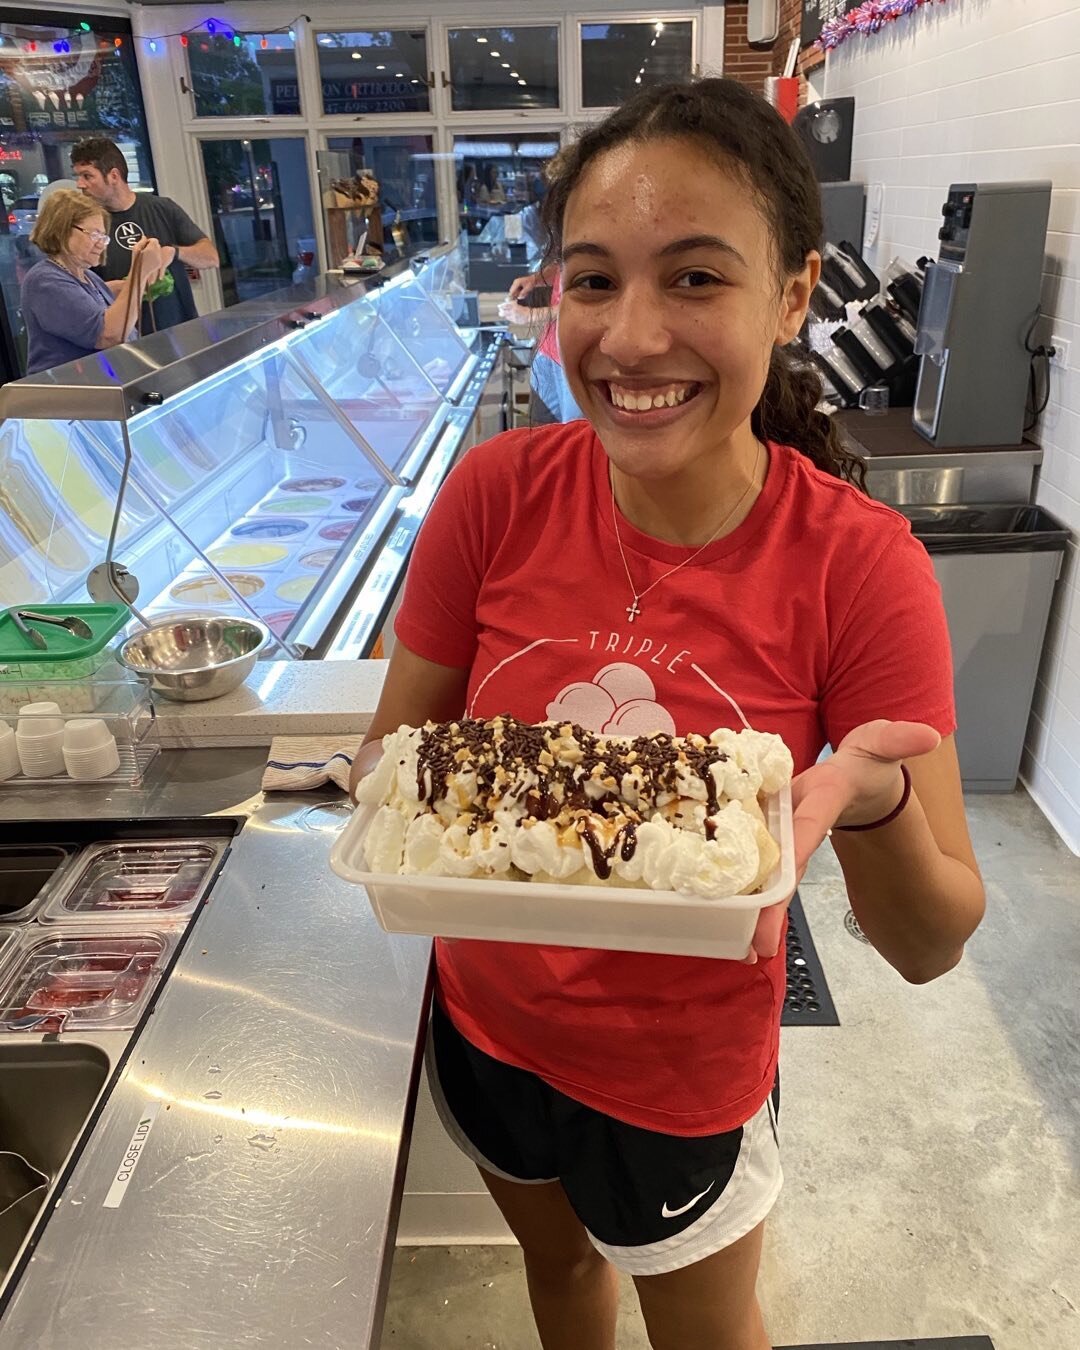 Tomorrow is our first &ldquo;national ice cream day&rdquo;. That makes today feel like &ldquo;New Years Eve for ice cream shops&rdquo;. Stop by and join us today or tomorrow at Triple Scoop&rsquo;d. Klaudia will be happy to make you a Triple Scoop&rs